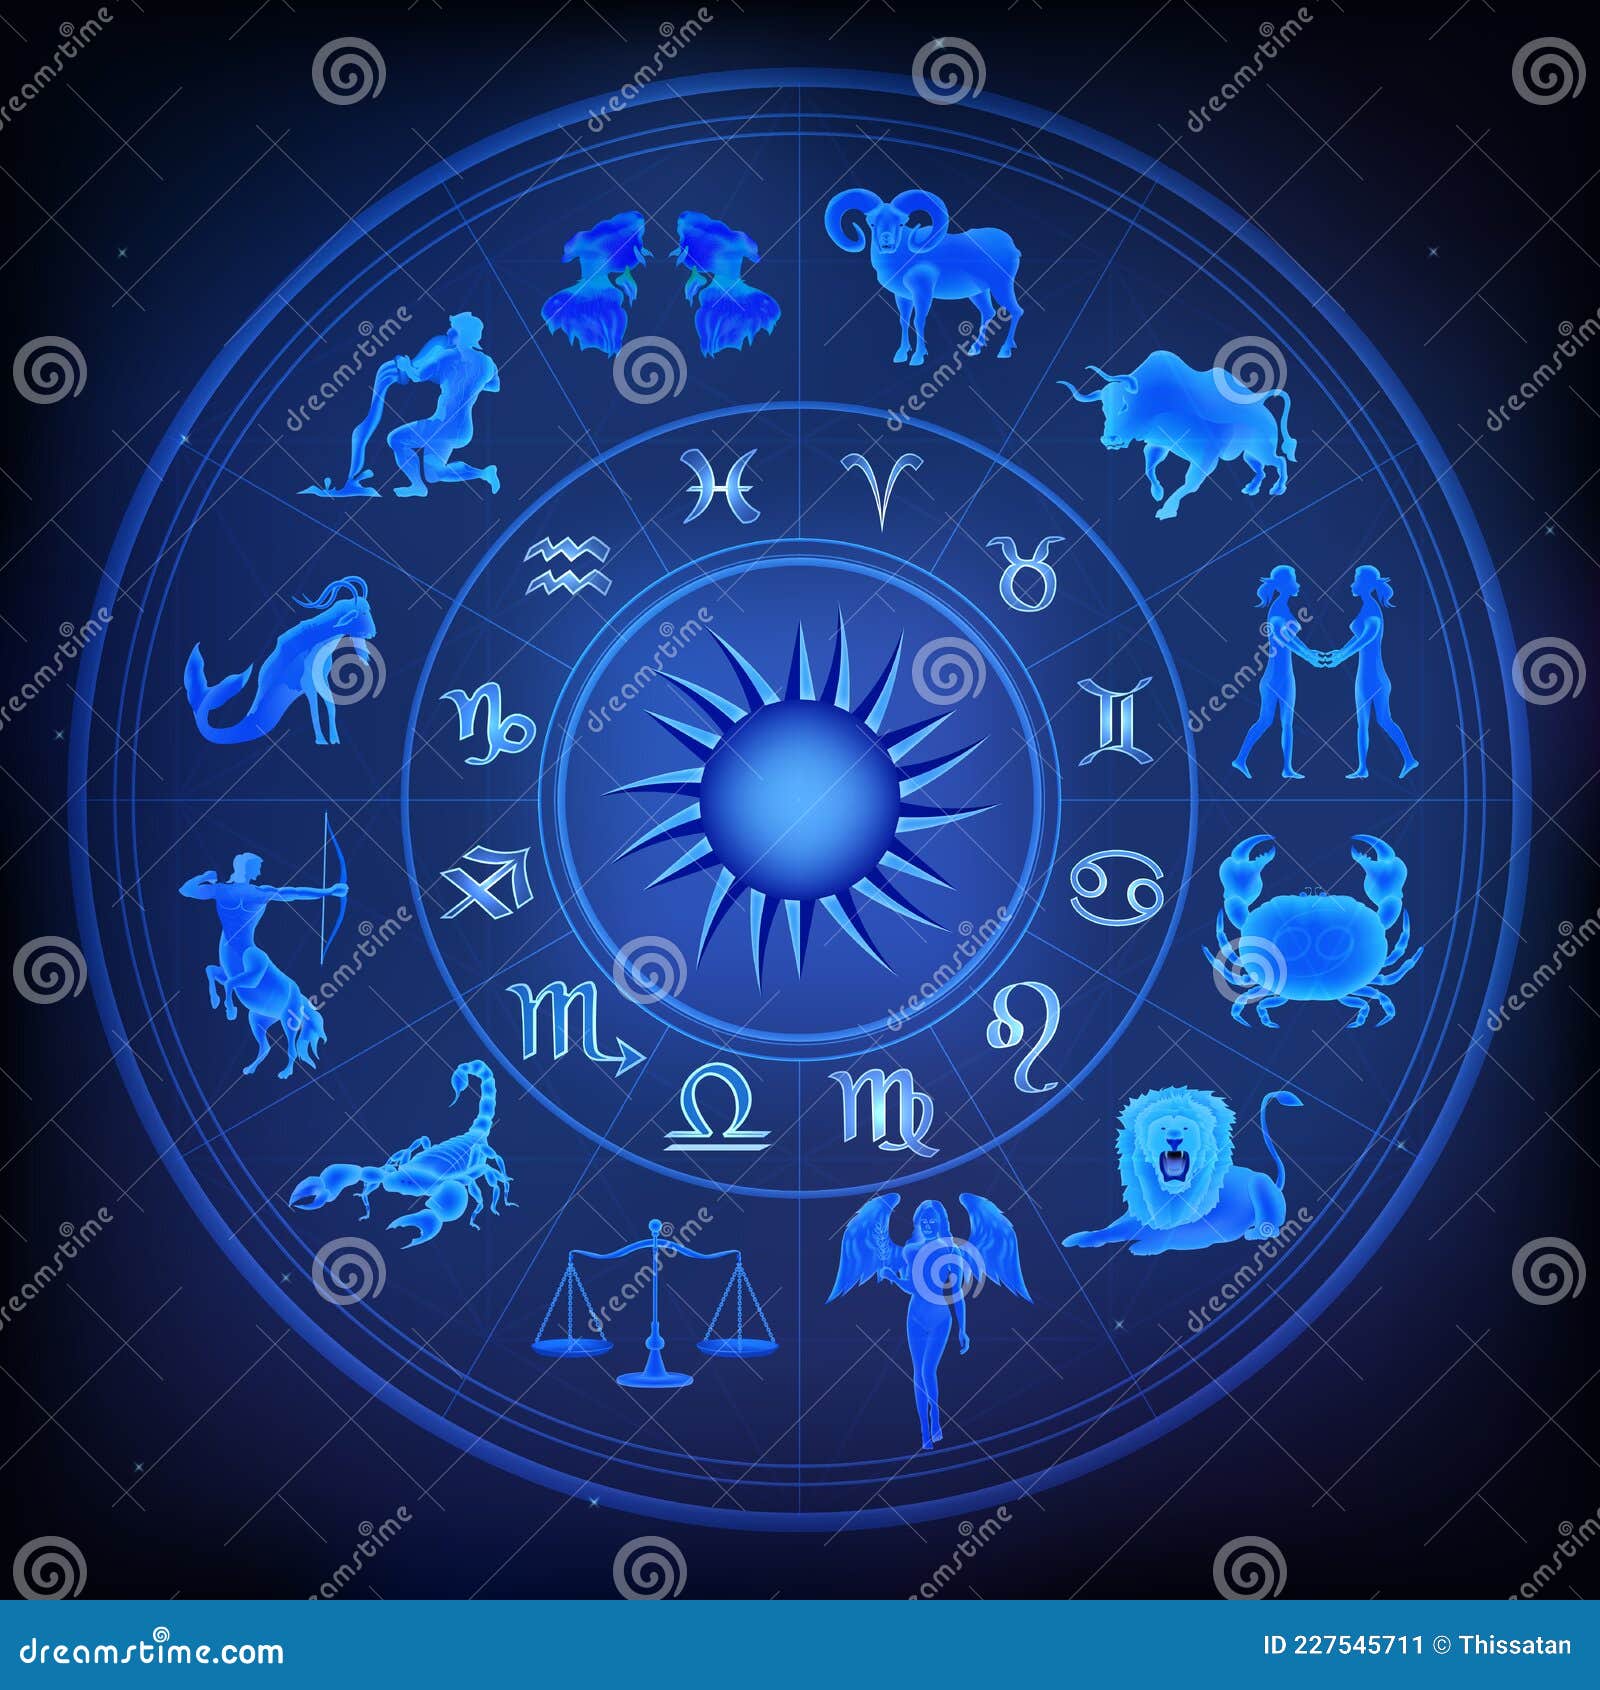 Astrology Horoscope Circle with Zodiac Signs. Vector Illustration Stock ...